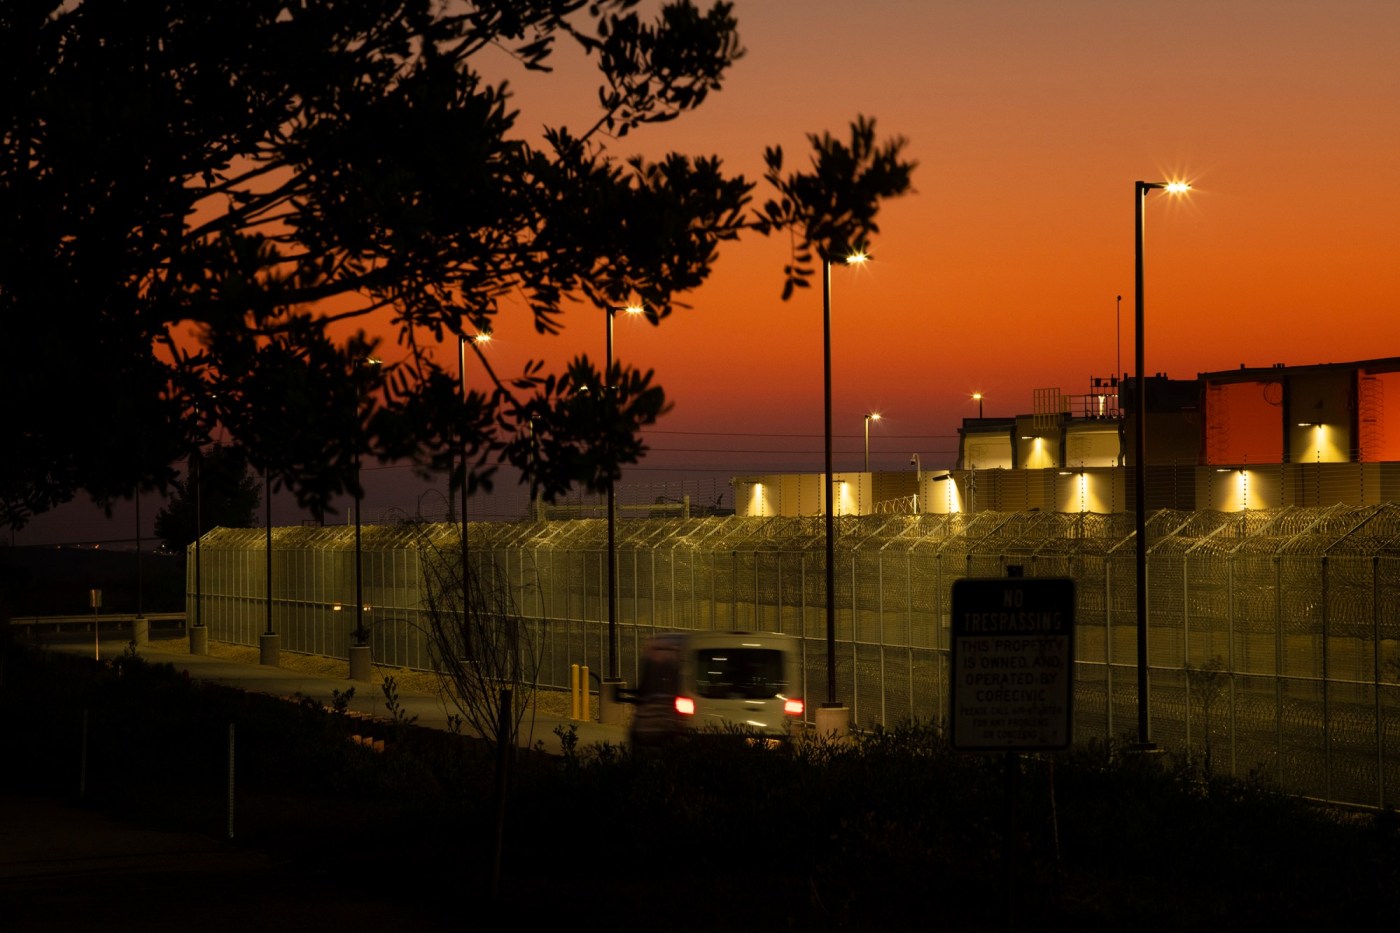 california-lawmakers-push-to-get-local-health-inspectors-into-immigration-facilities